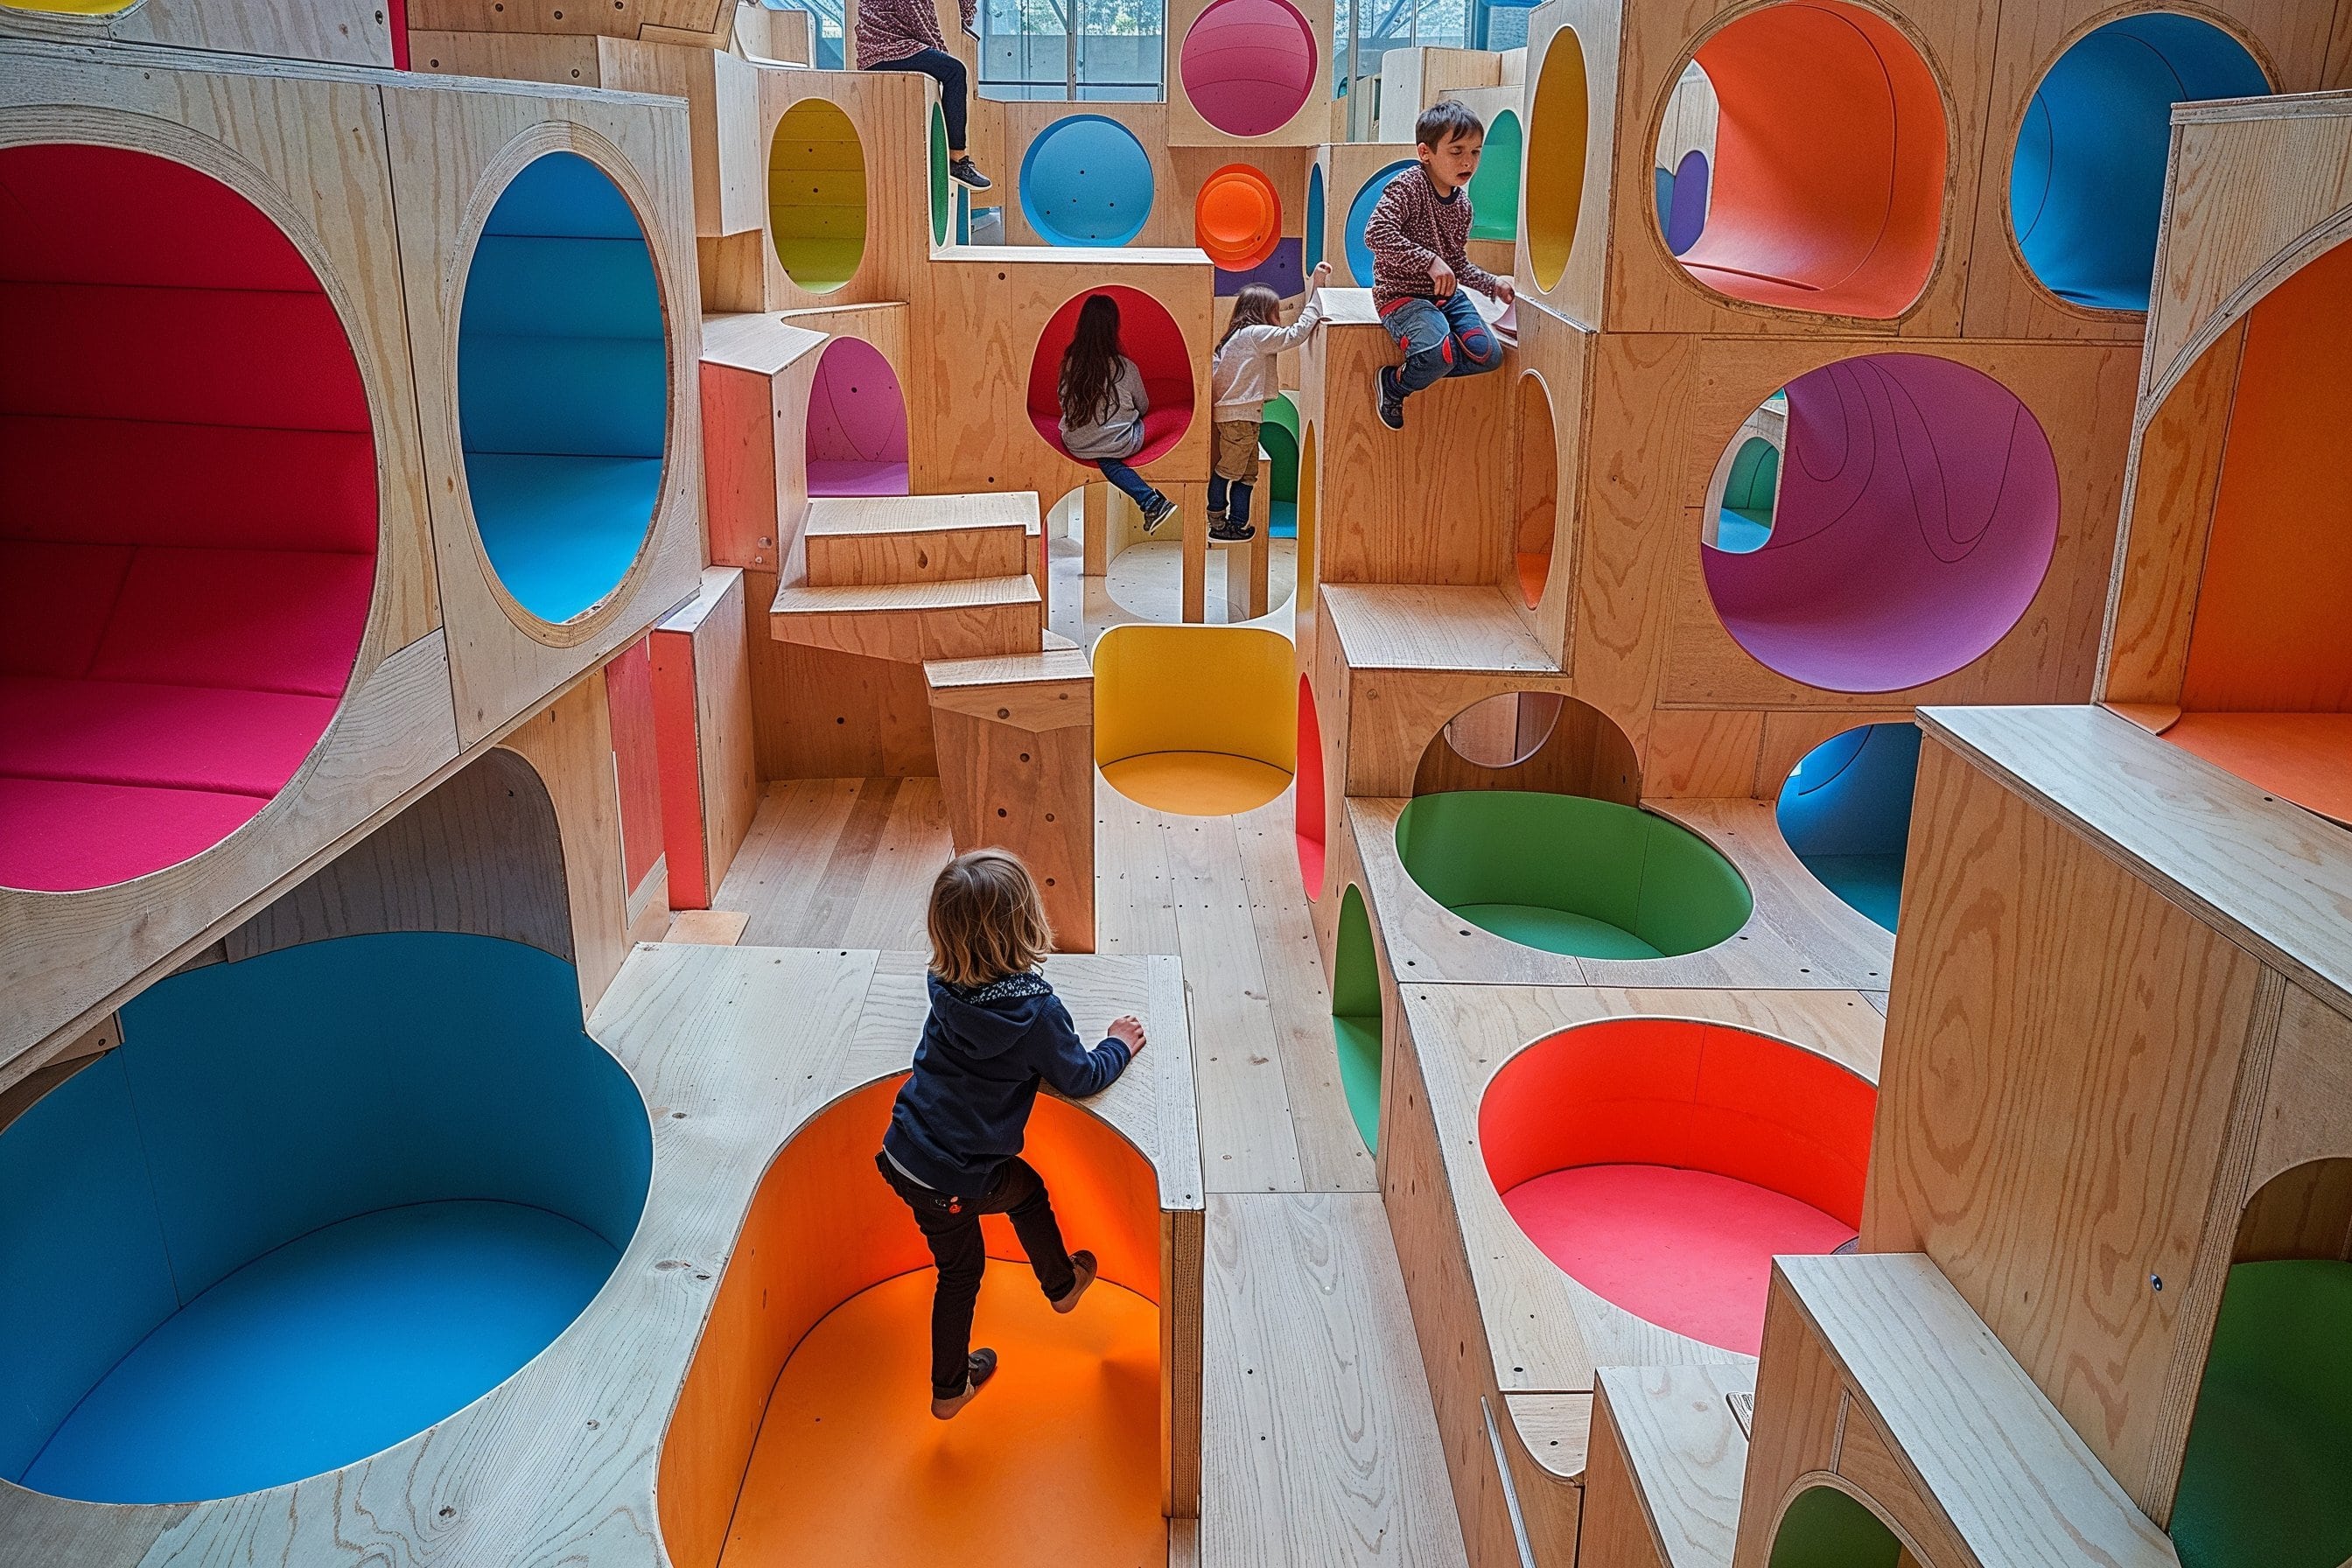 Imaginative labyrinthian children's playground built with sustainable plywood materials from Melbourne plywood supplier, Plyco